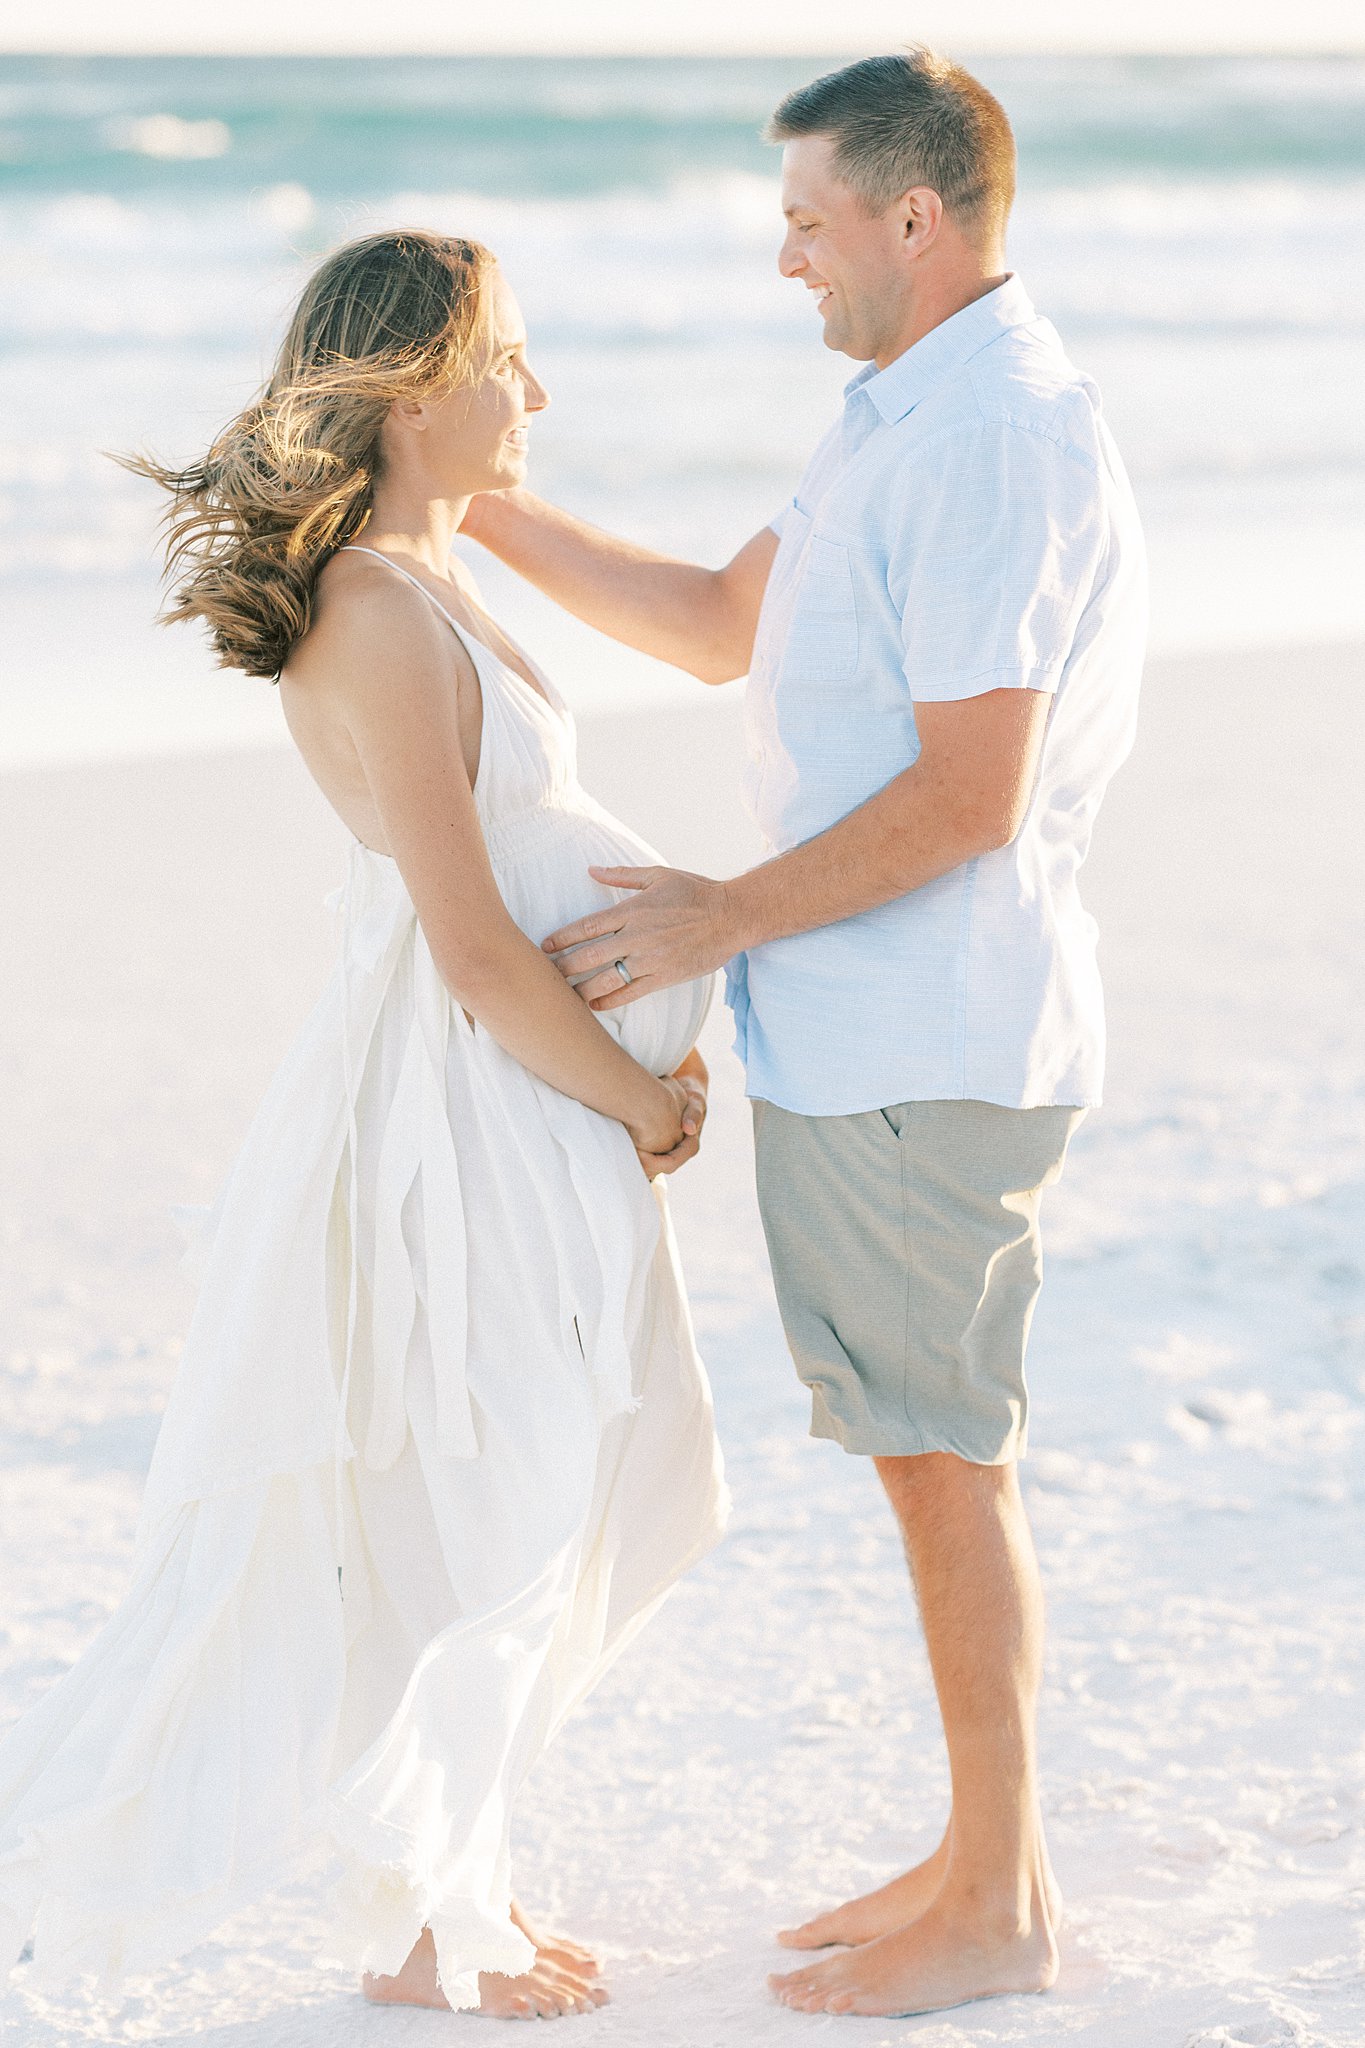 A mom to be in a white maternity dress stands on the beach with her husband running a hand through her hair Childbirth Classes Dallas